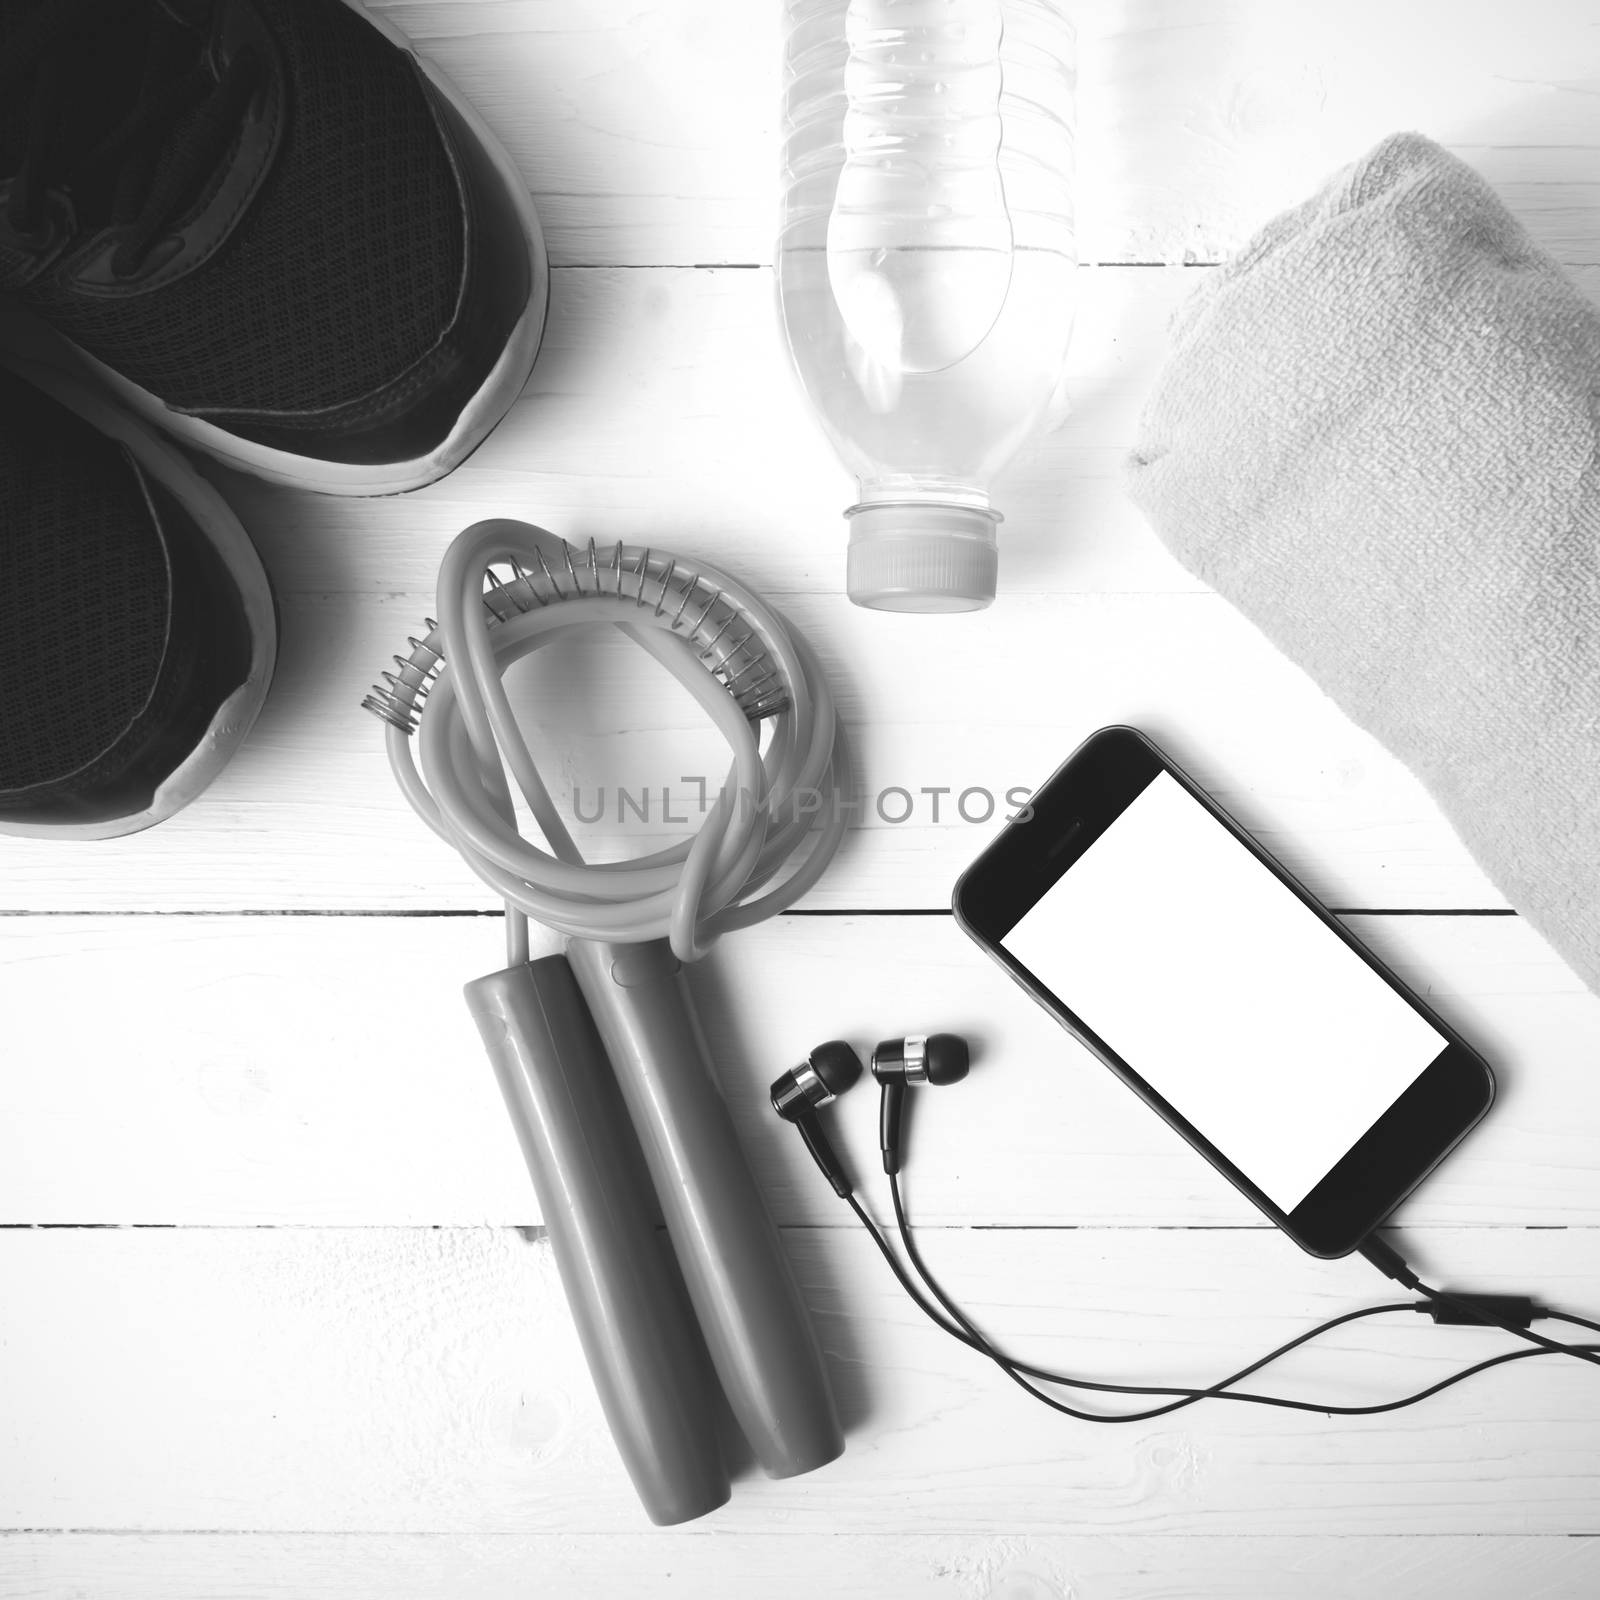 fitness equipment : running shoes,towel,jumping rope,water bottle and phone on white wood table black and white color tone style